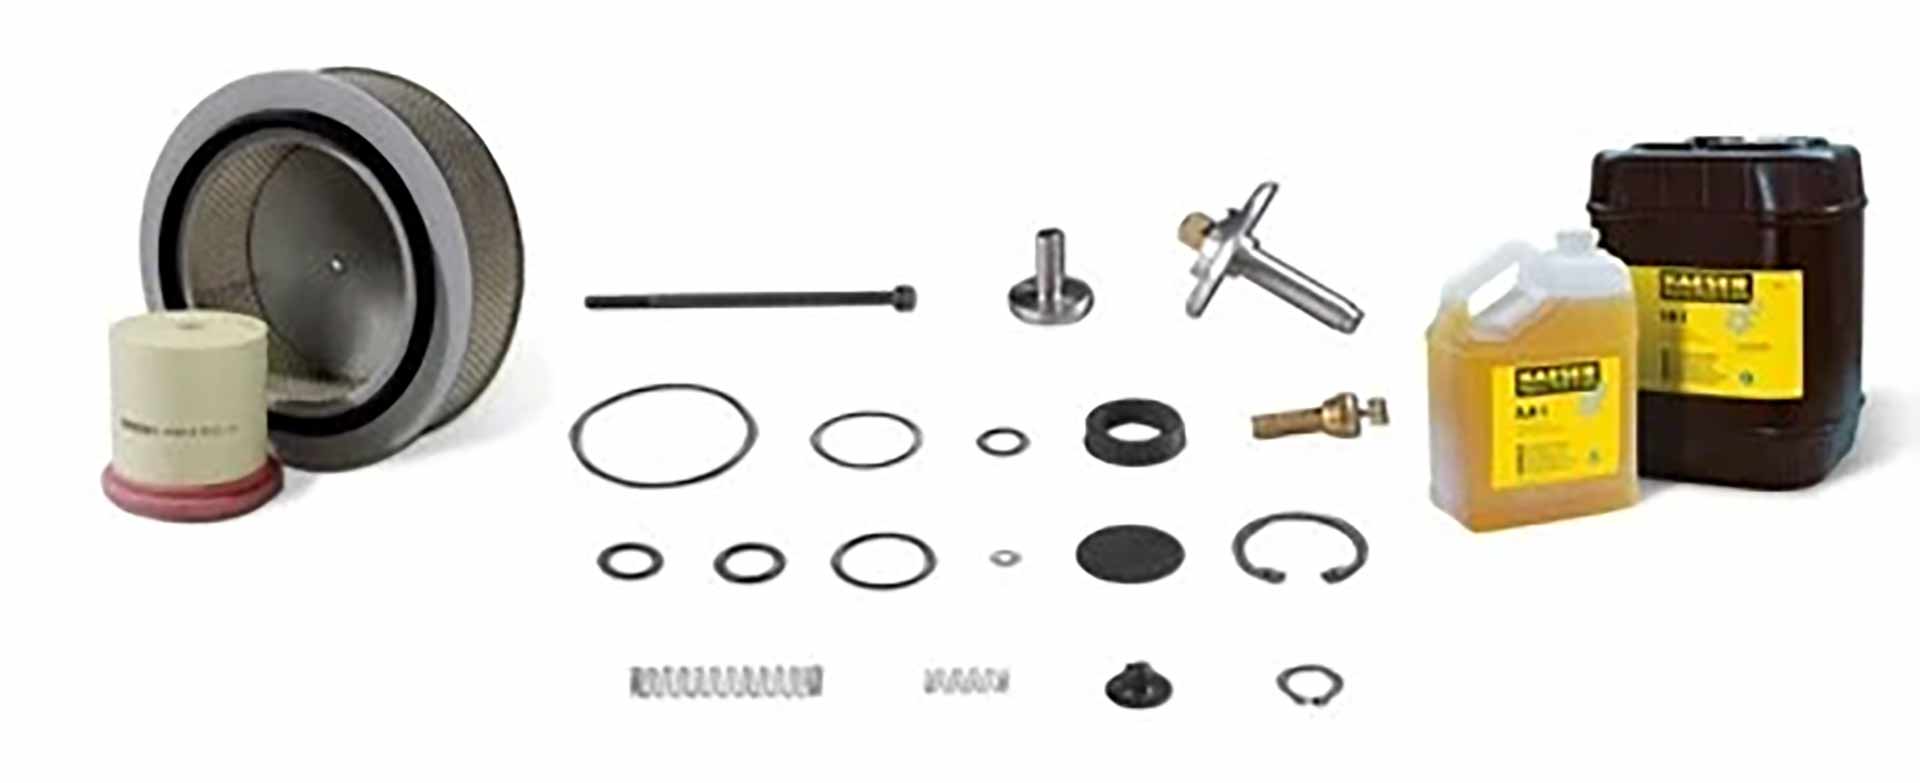 kaeser accessories and parts